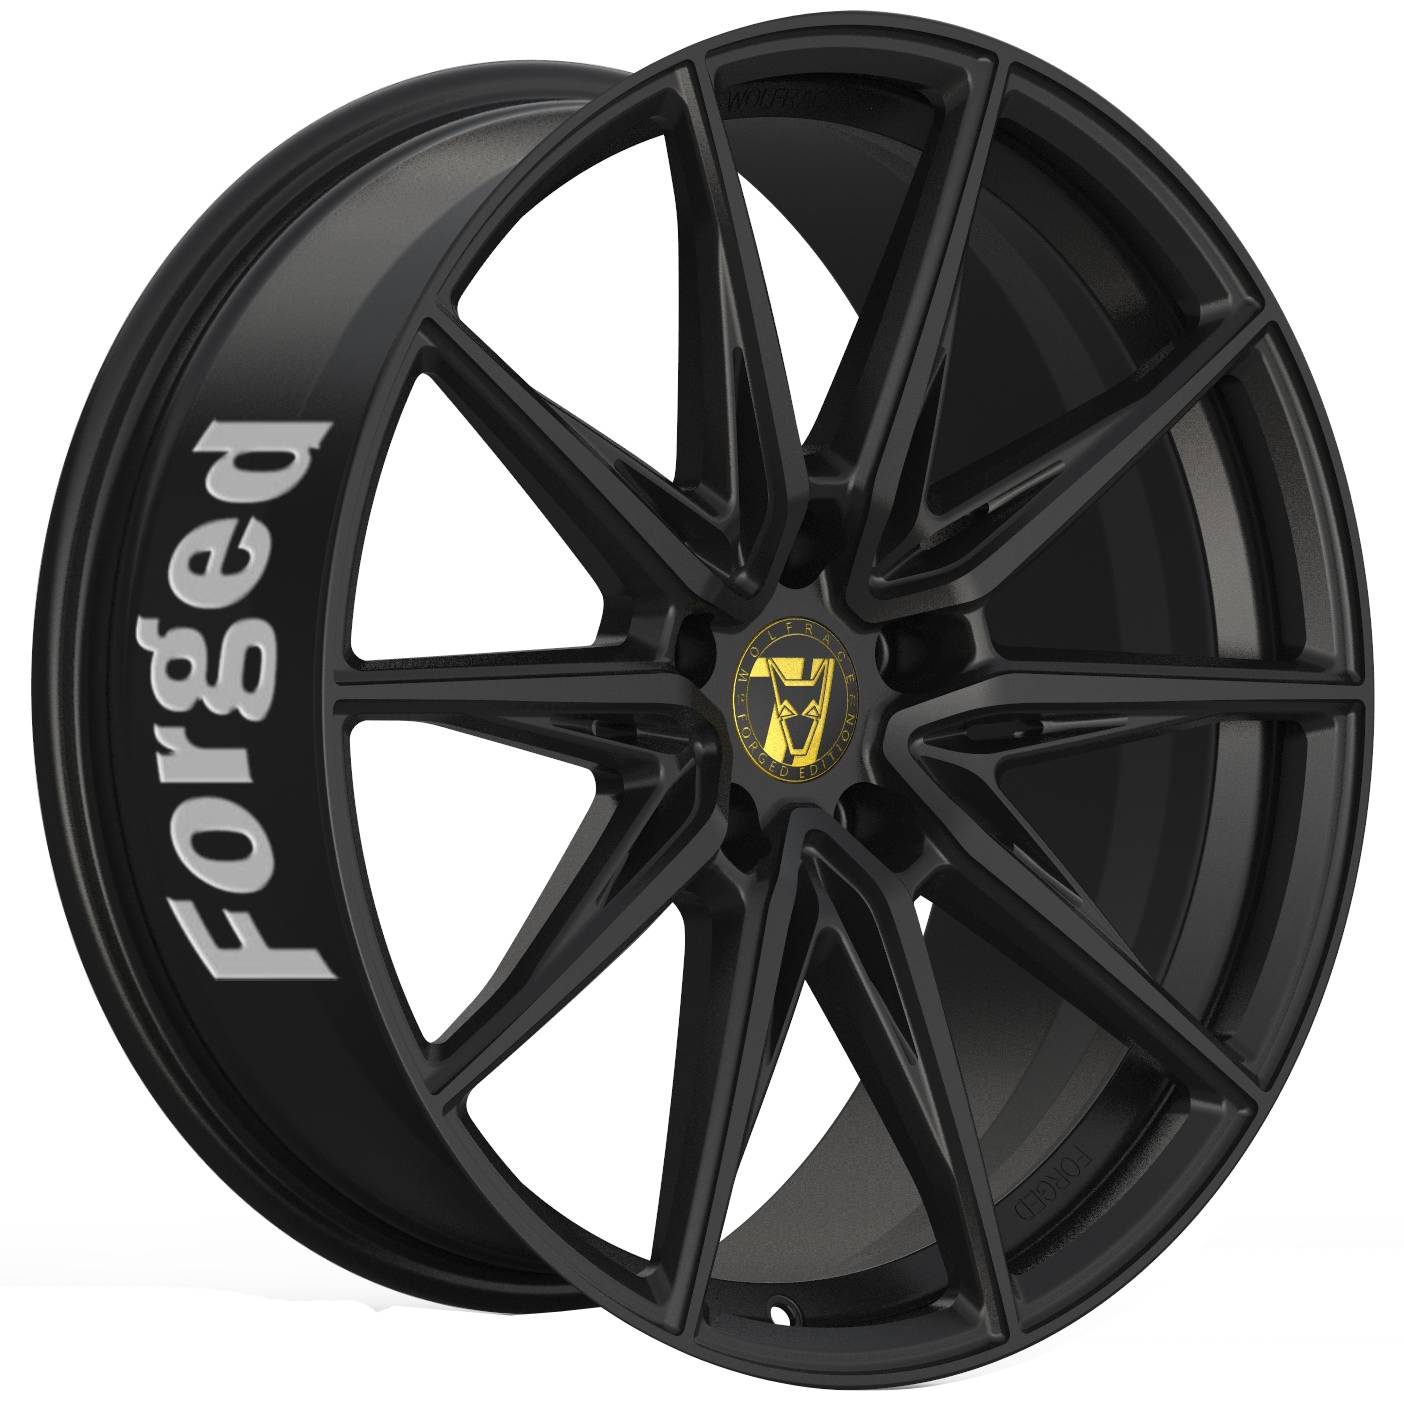 Demon Wheels 71 Forged Edition Urban Racer Forged [12x23] -5x114.3- ET 40